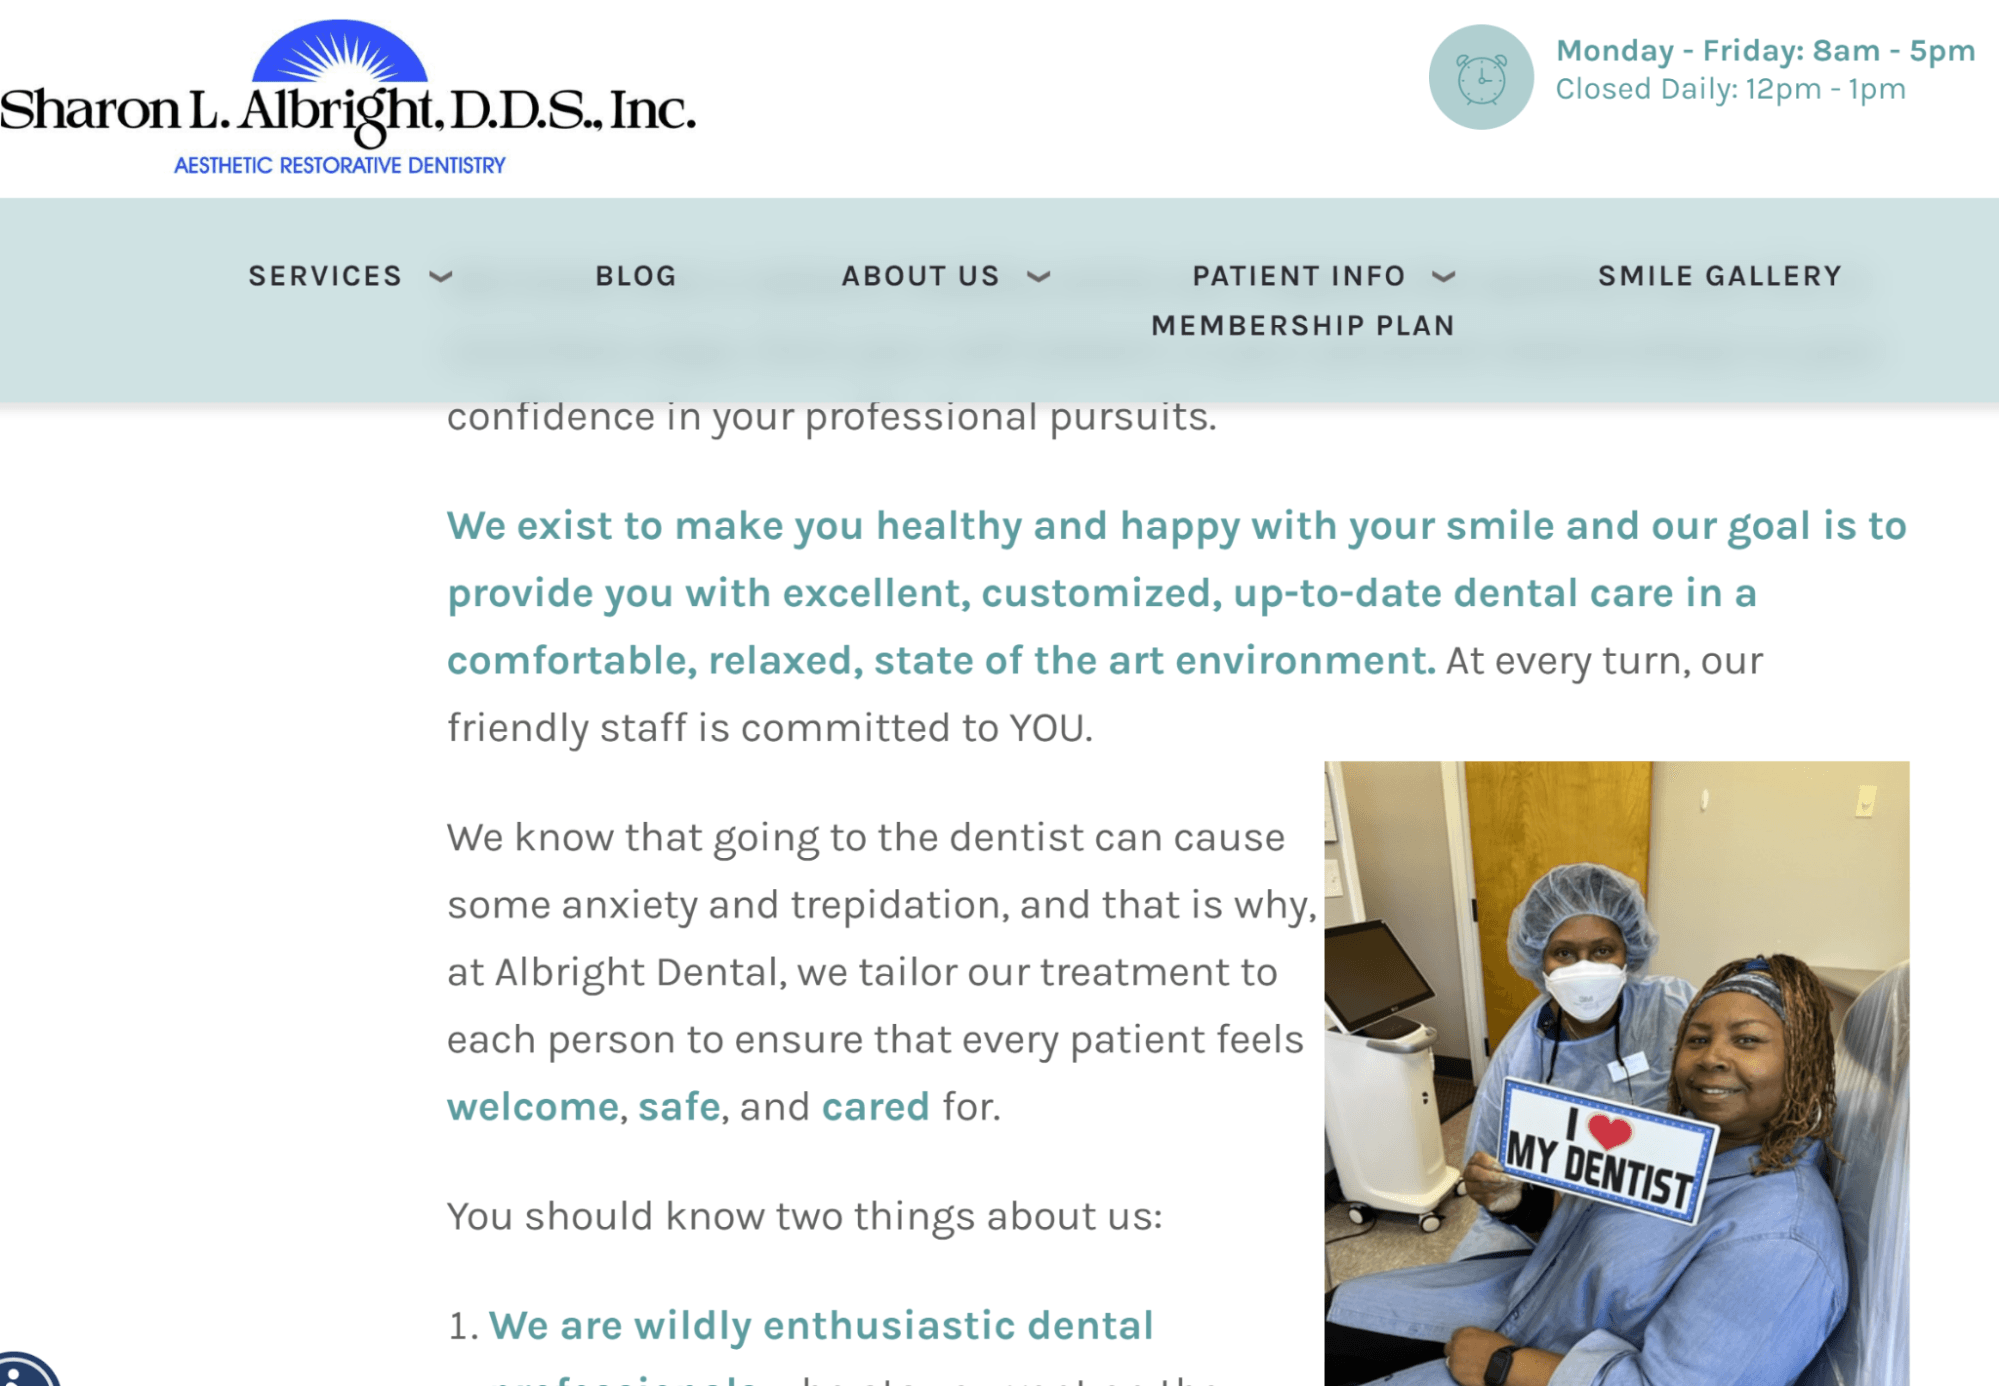 A dentist's bio shows her taking care of a patient who is holding up a sign that reads "I love my dentist". The text centers the customer and addresses them and their needs directly.